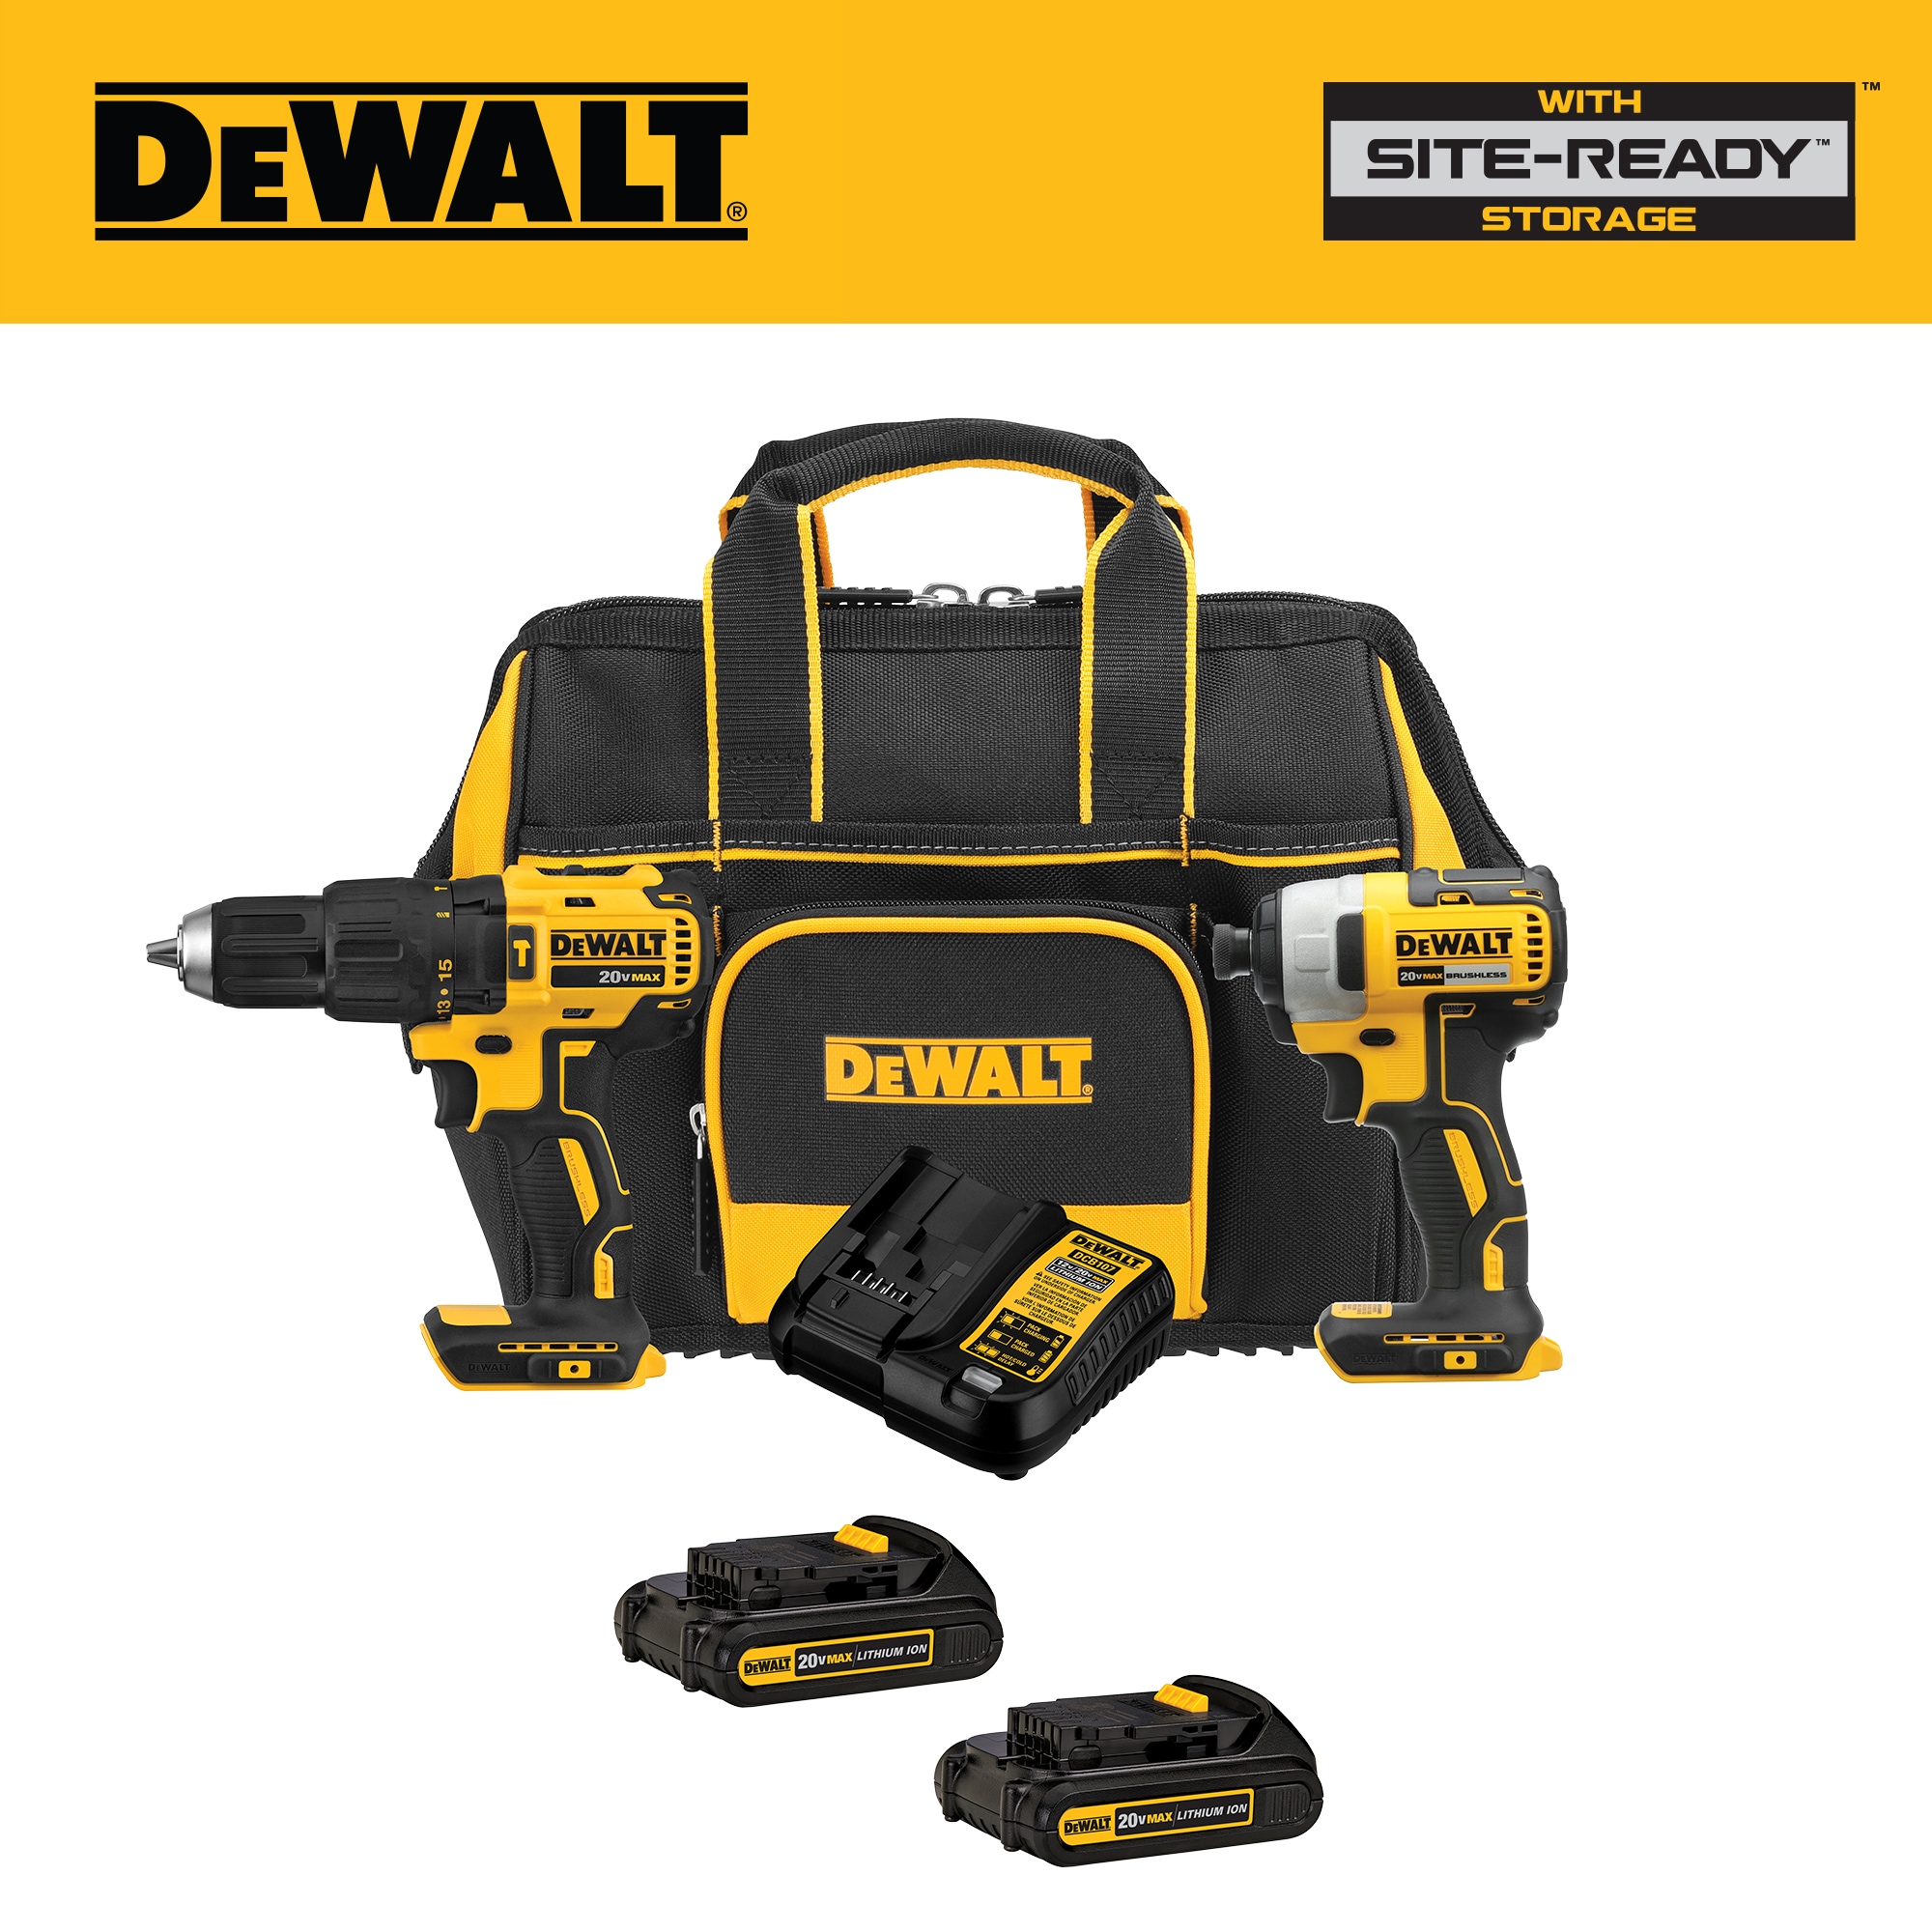 DEWALT 2-Tool 20-Volt Brushless Power Tool Combo Kit with Soft Case (2-Batteries and charger Included)